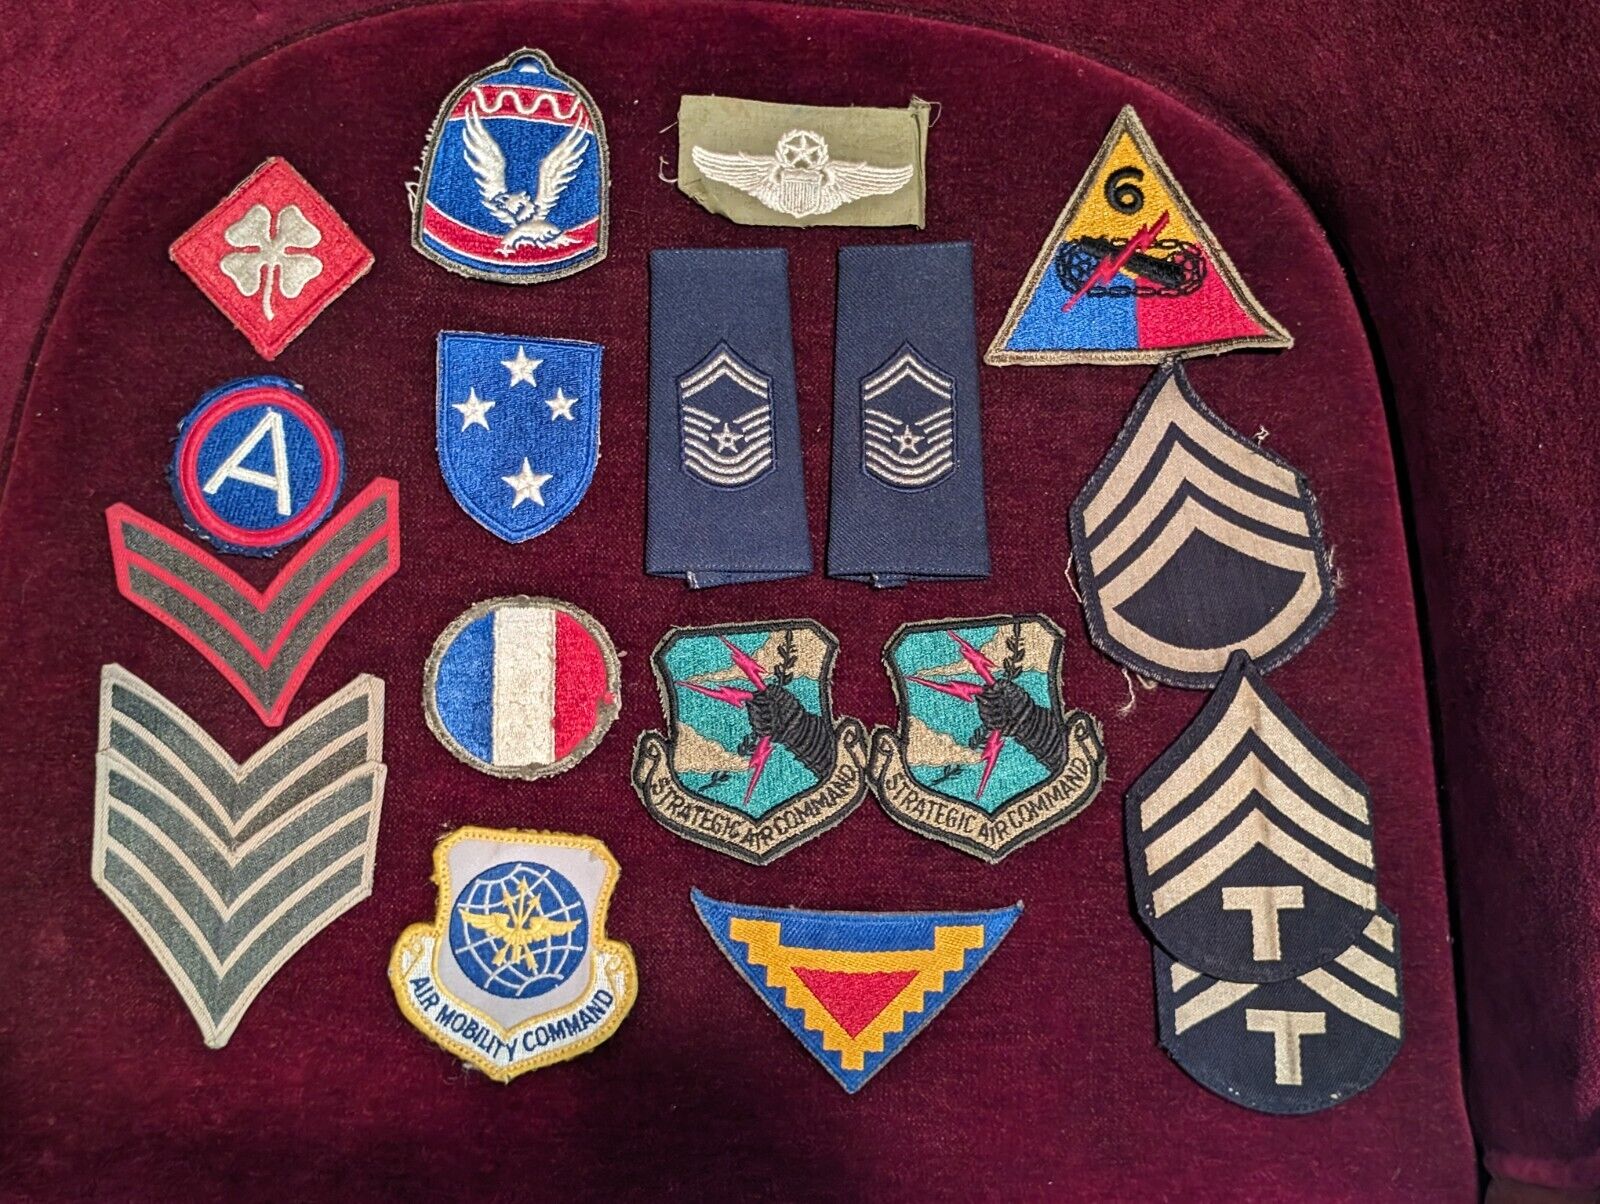 Vintage WW2 Korea Vietnam US Army Mixed Military Patch Lot of 19 Authentic Rare